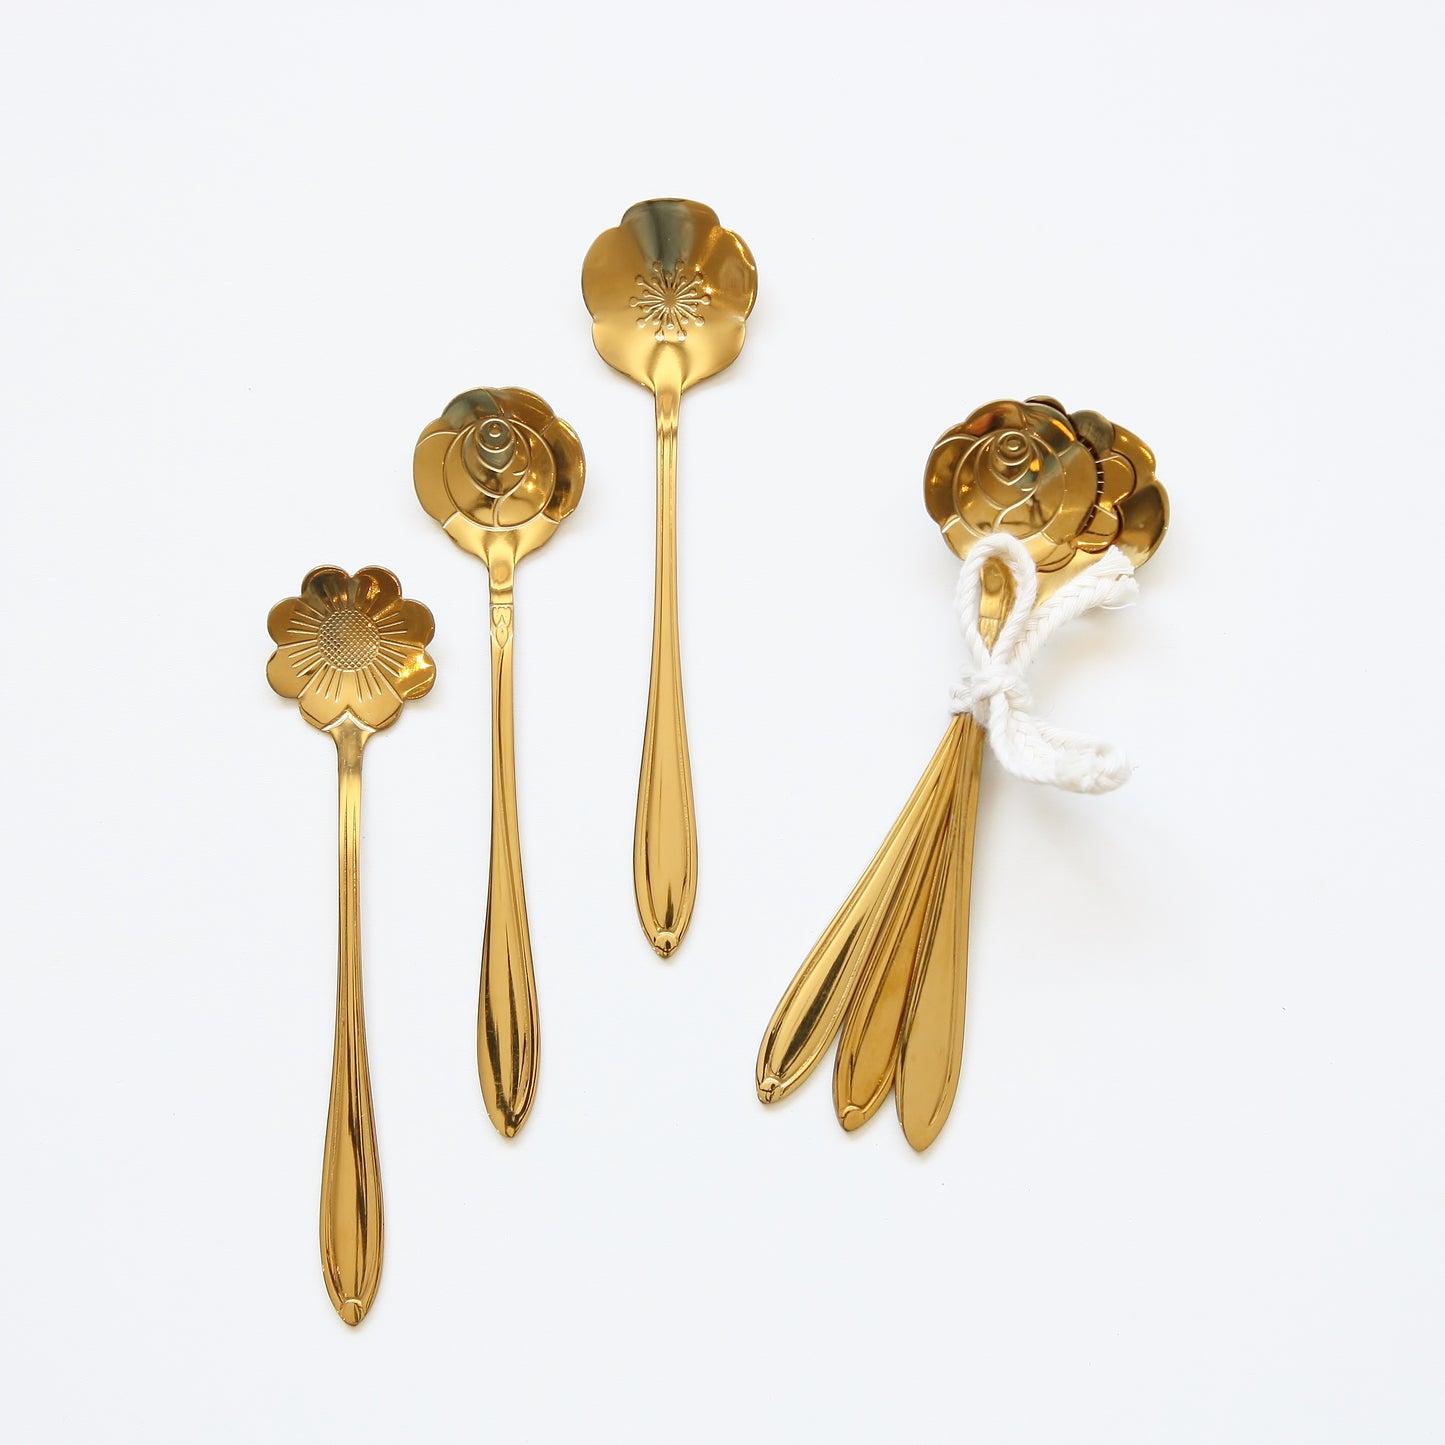 Mini Gold Floral Spoons - Set of 3